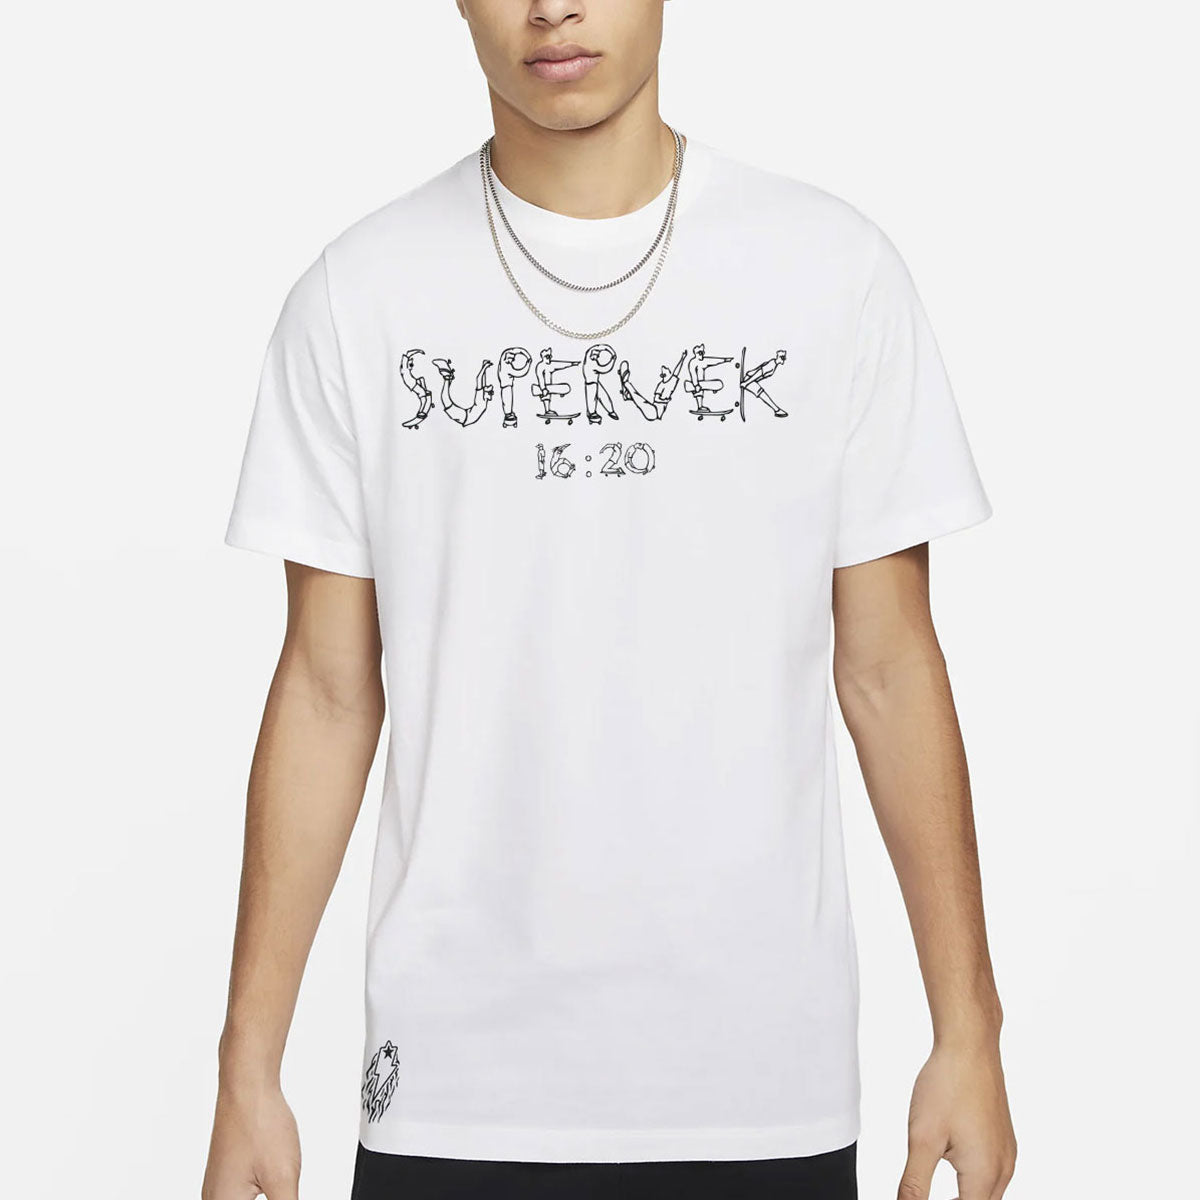 Just Send it Skateboarding Graphic T-Shirt india